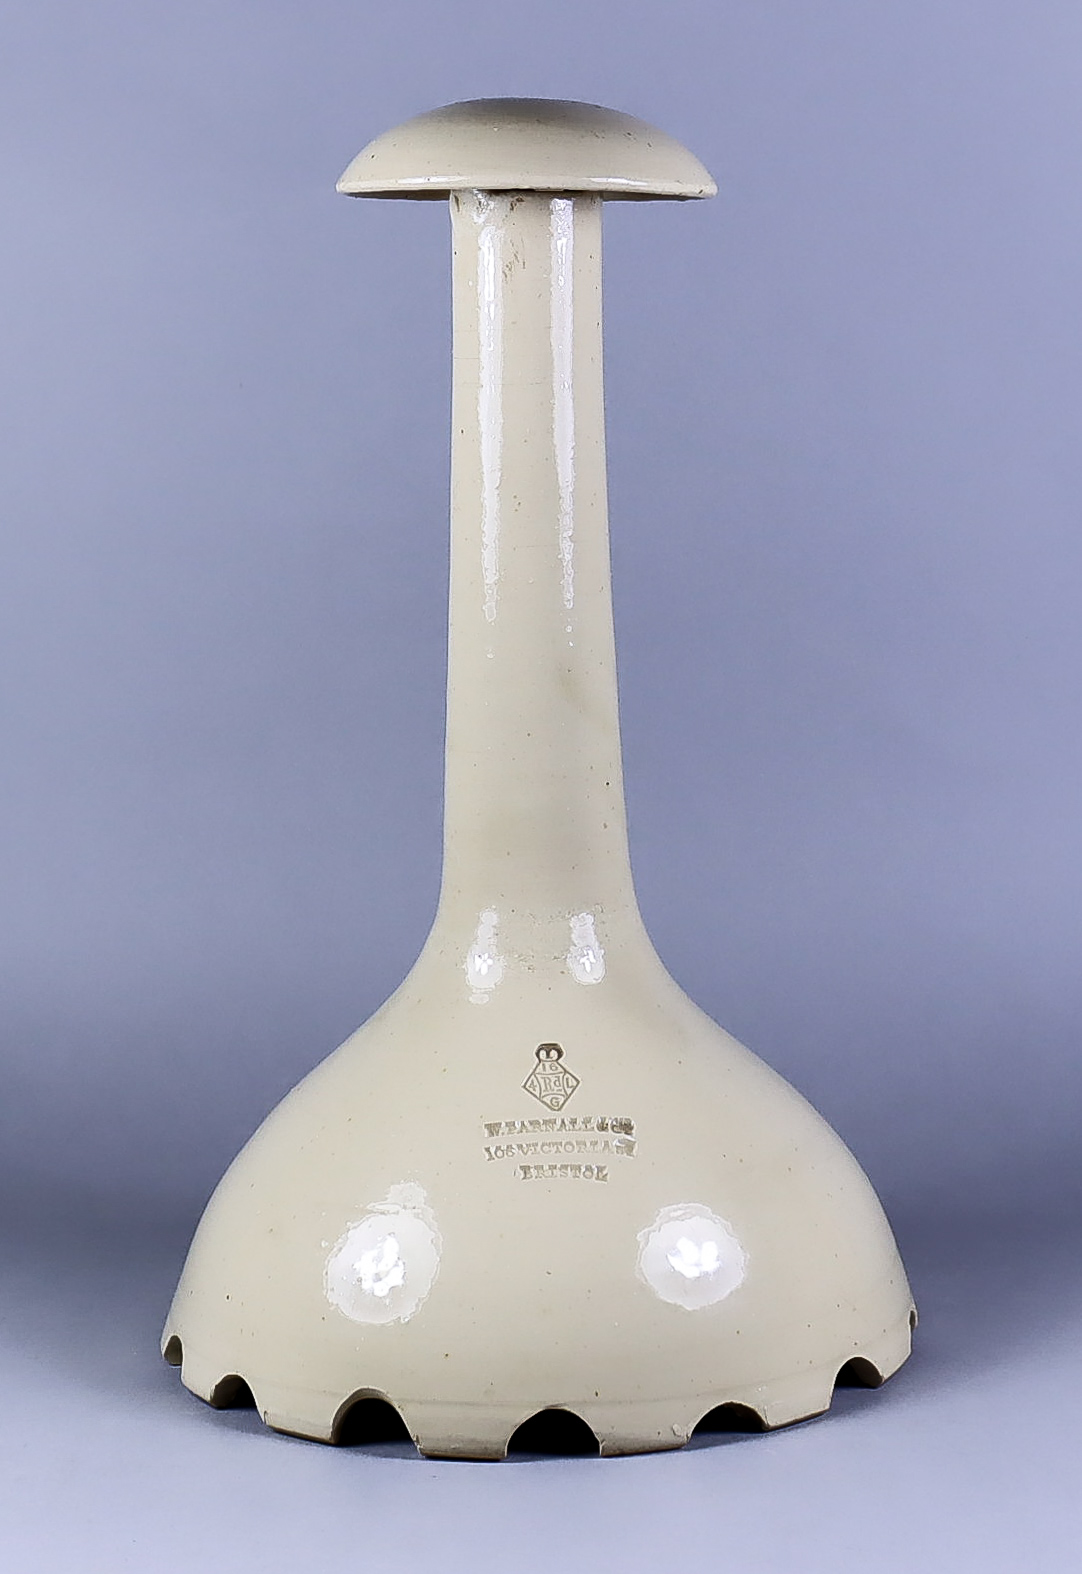 A Salt Glazed Stoneware Giant Pie Funnel, 19th Century, by Price Bristol and produced for "W.